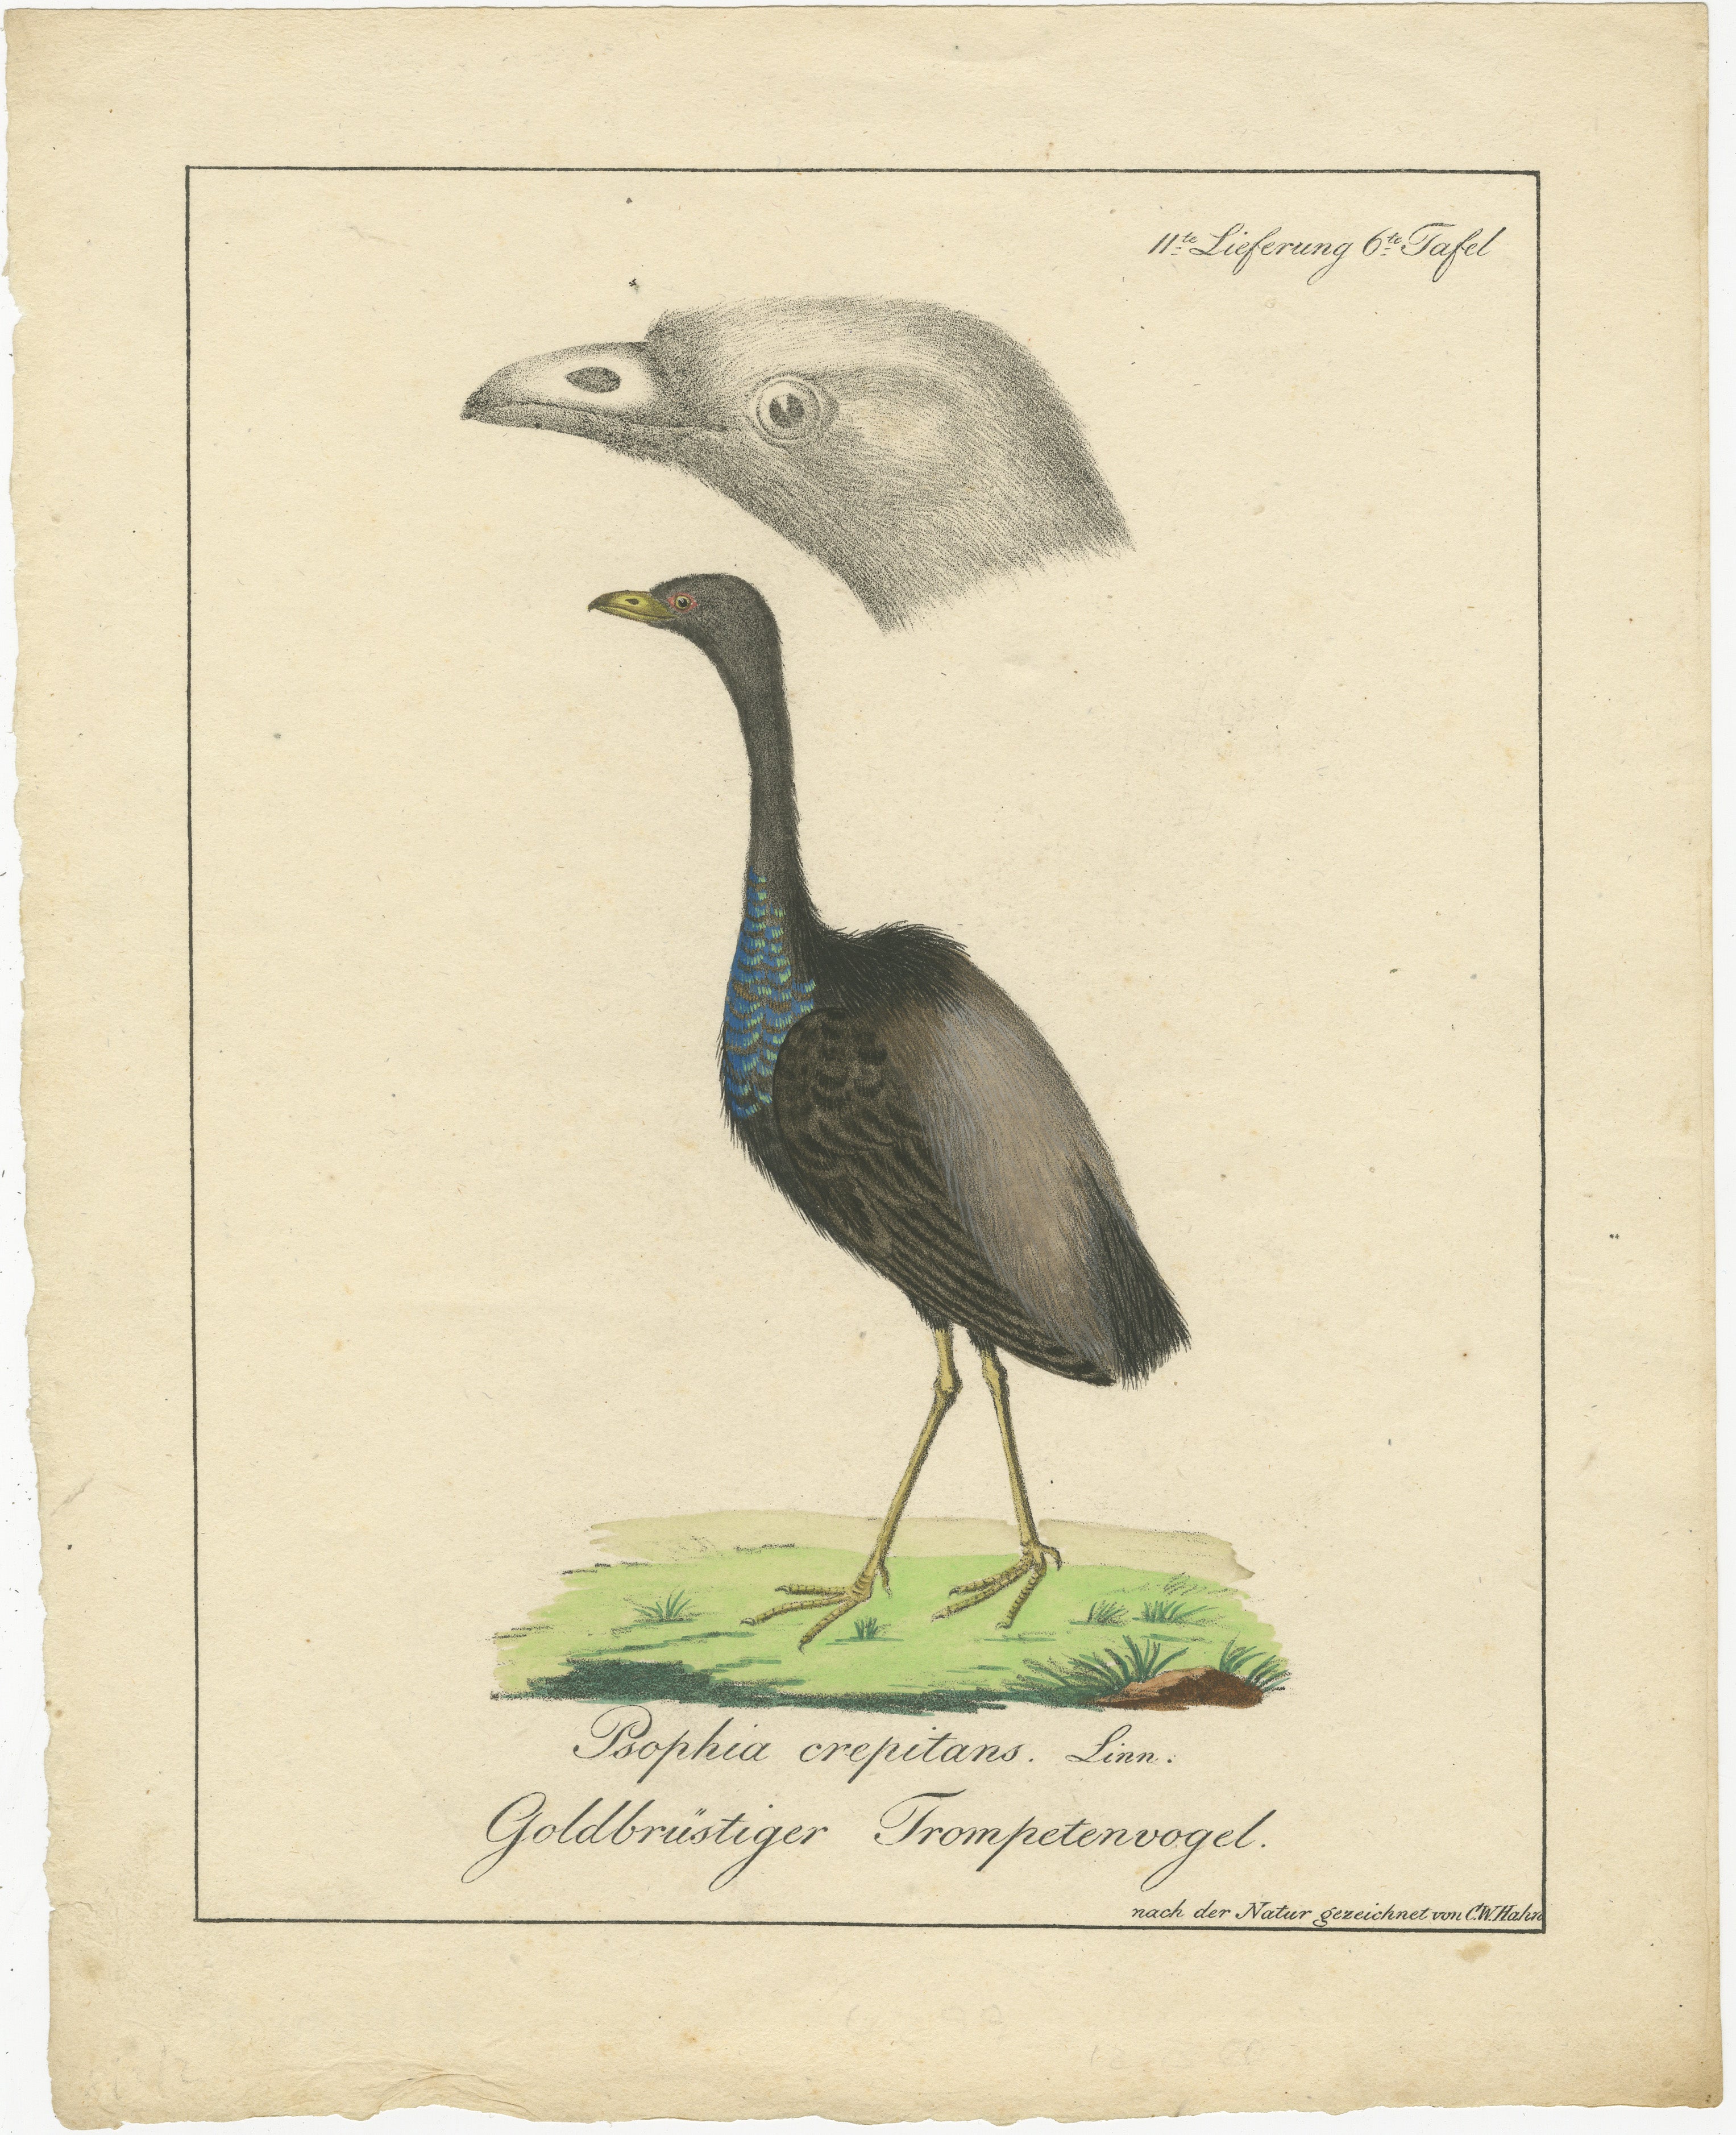 This print is an old-colored lithography by Carl Wilhelm Hahn from around 1820 and it's listed in Nissen's bibliographic catalog of zoological books, which is referenced as 